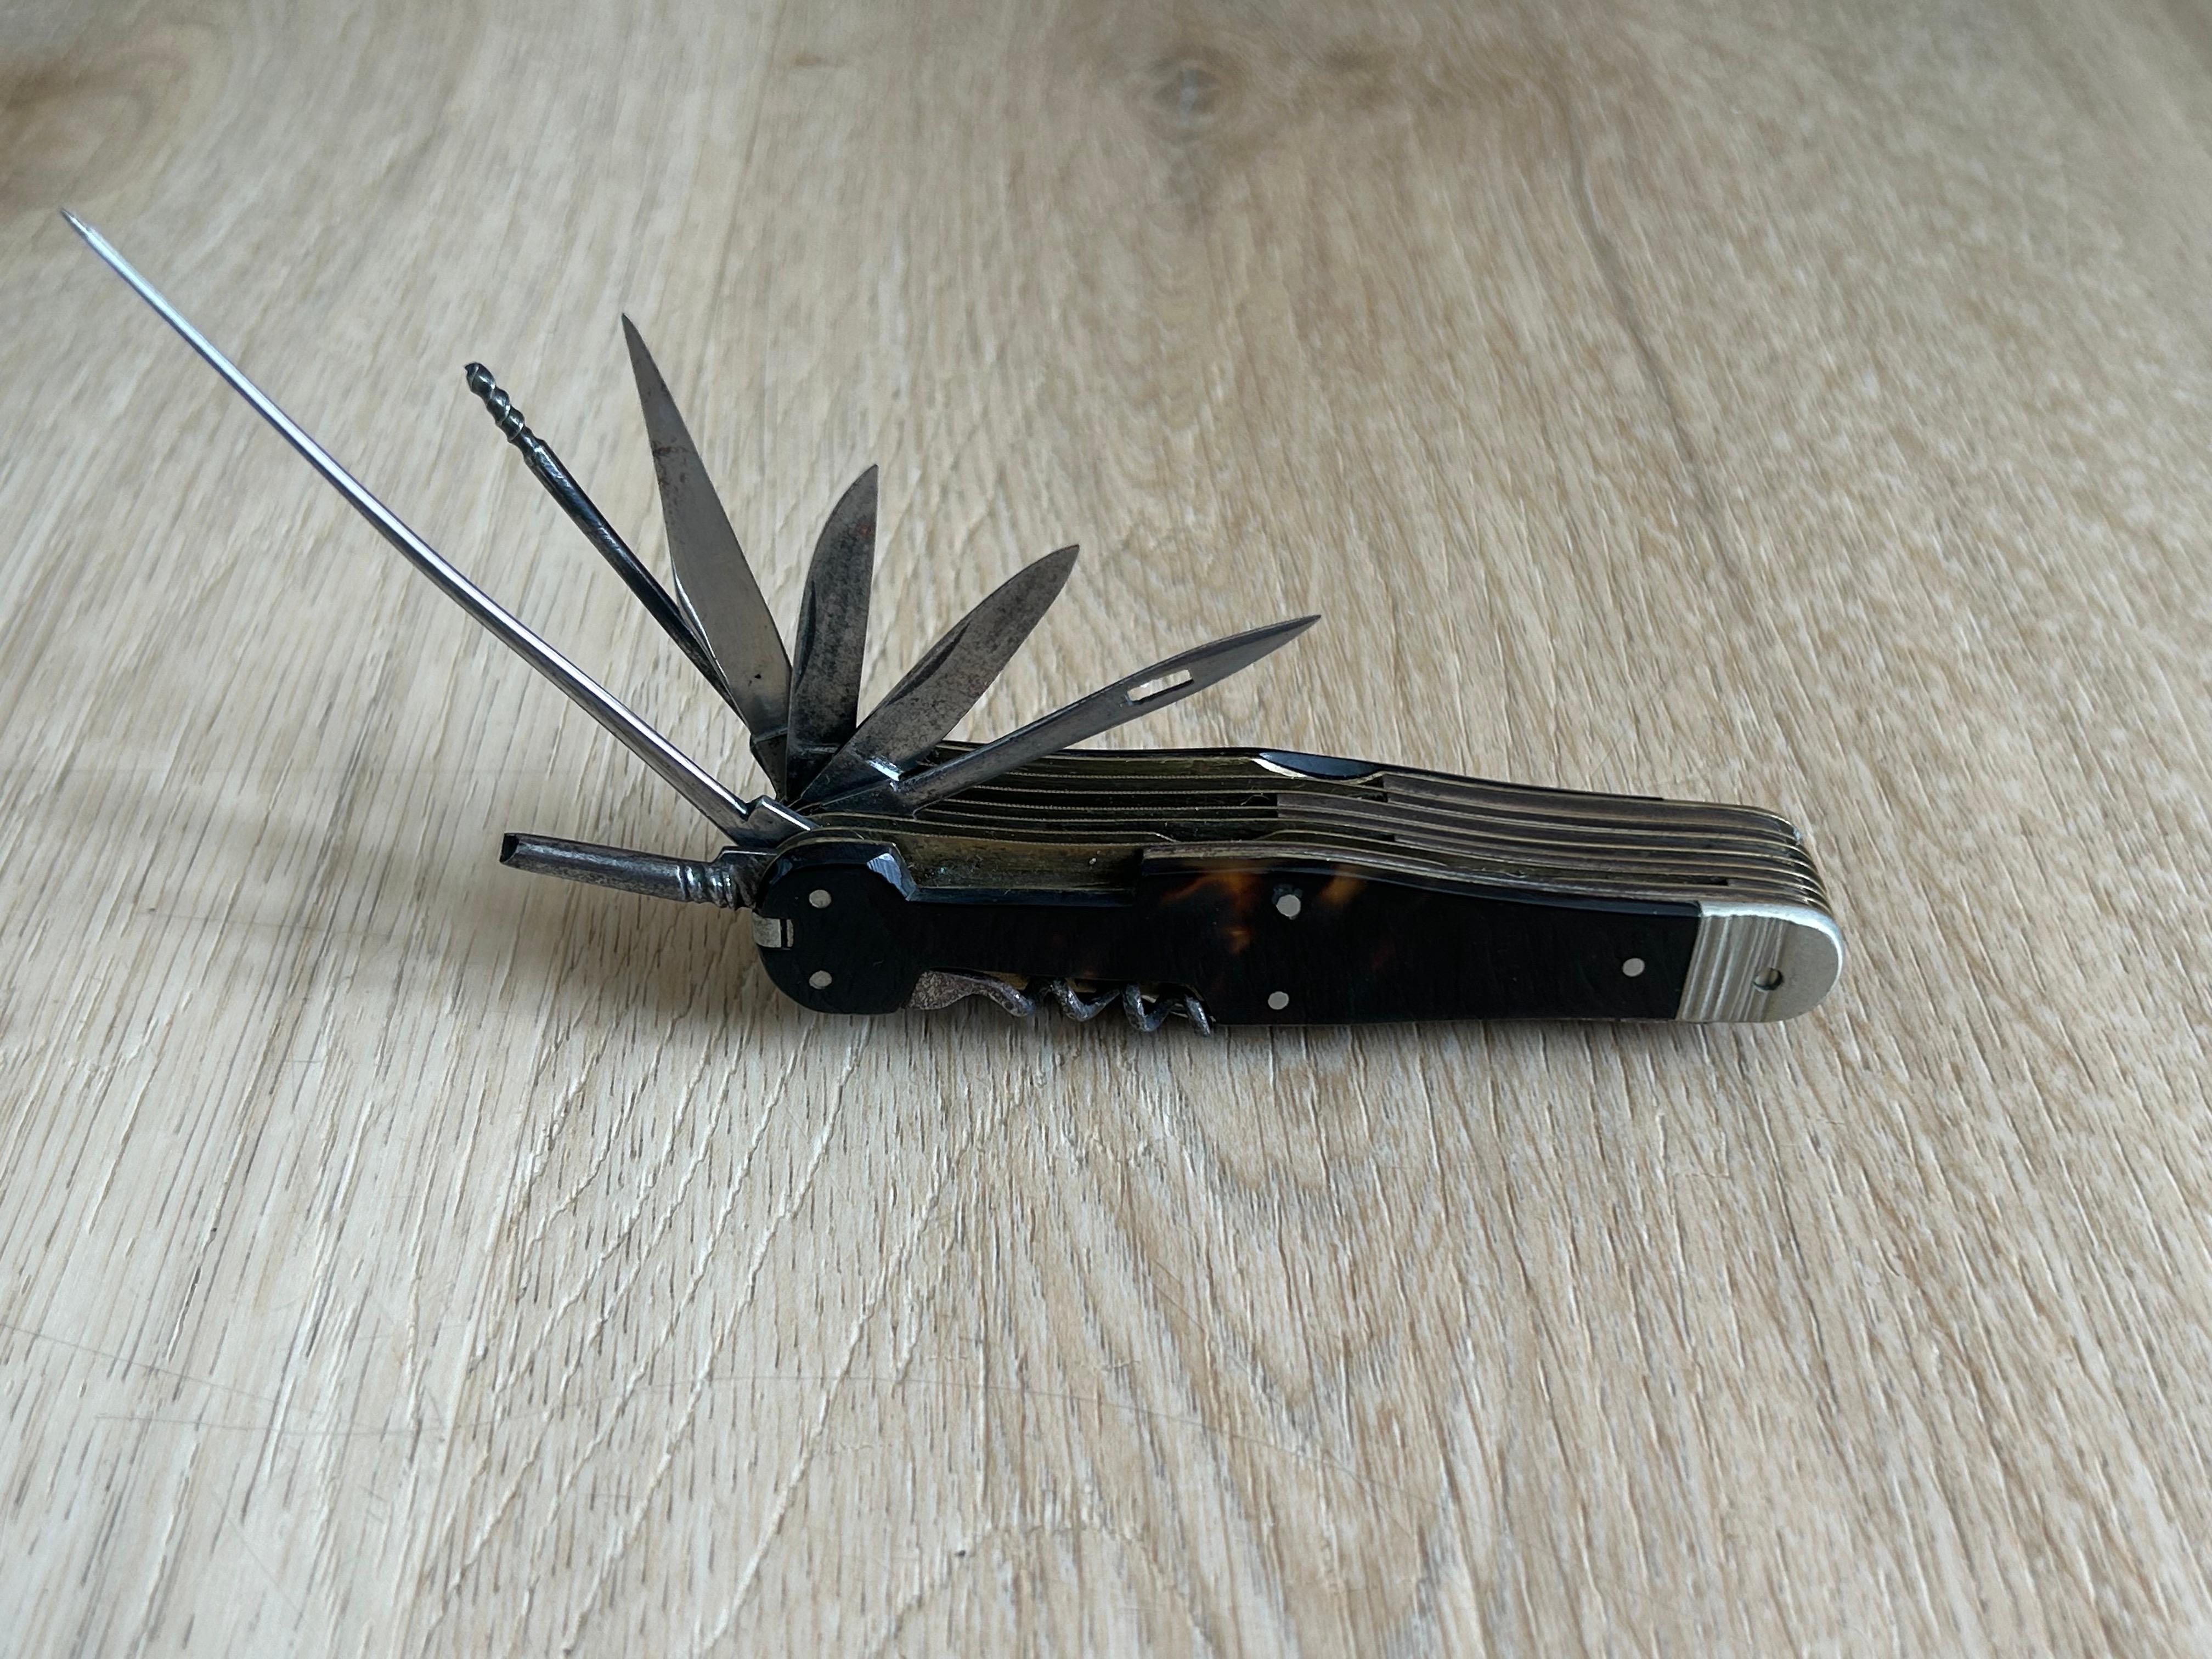 A rare early tortoiseshell 'Swiss Army' Pen Knife, c. 1900, containing a multitude of blades and other useful implements, 9 cm long. The Swiss Army knife (German: Schweizer Offiziersmesser) is a pocket knife or multi-tool manufactured by Victorinox